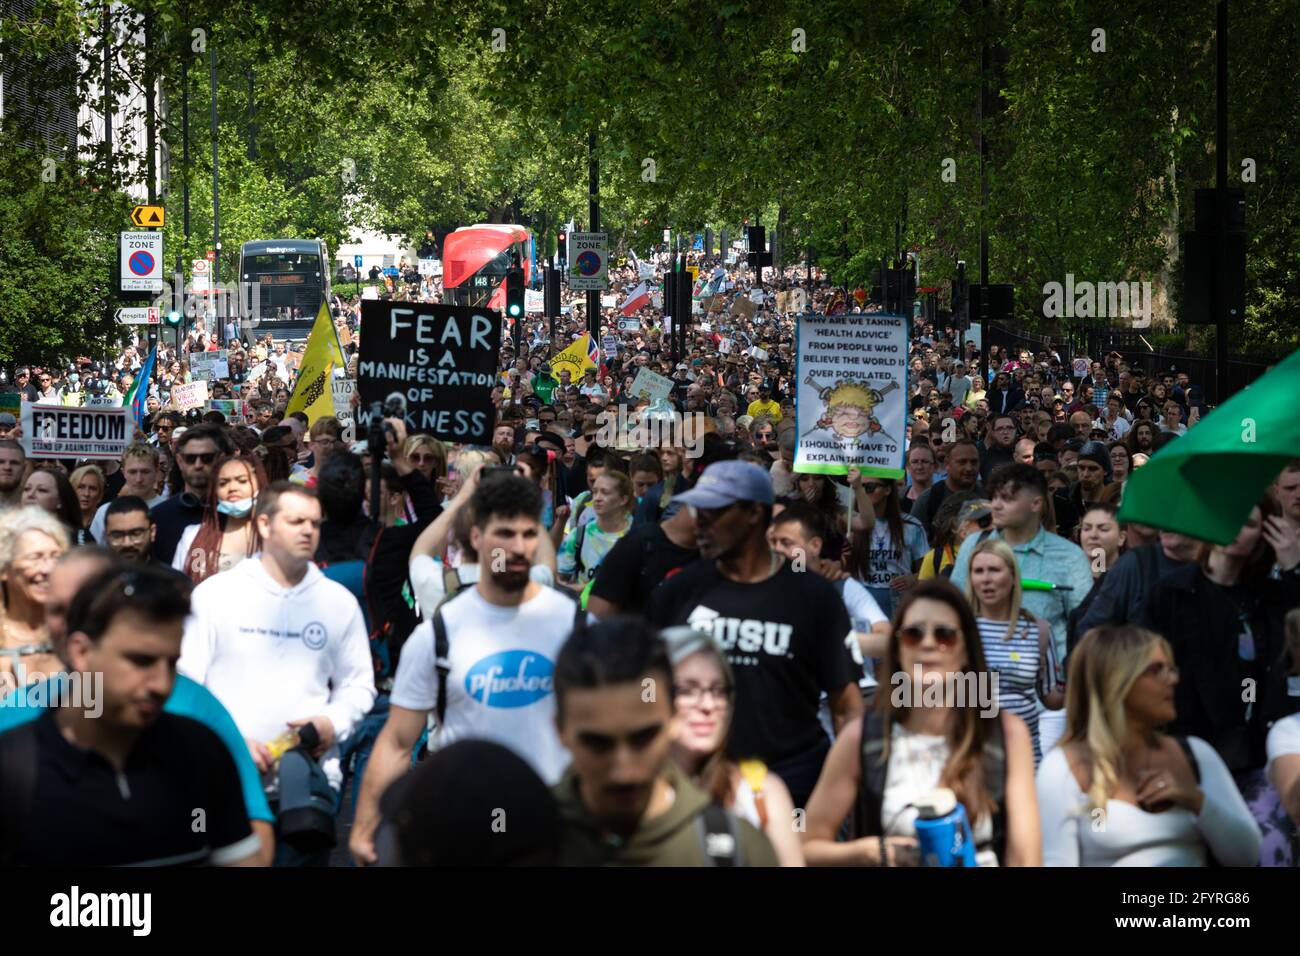 Manchester, UK. 29th May, 2021. Protesters march through the city during an anti-lockdown protest. The number of people attending the protests has increased month on month since the introduction of the COVID-19 restrictions. Credit: Andy Barton/Alamy Live News Stock Photo